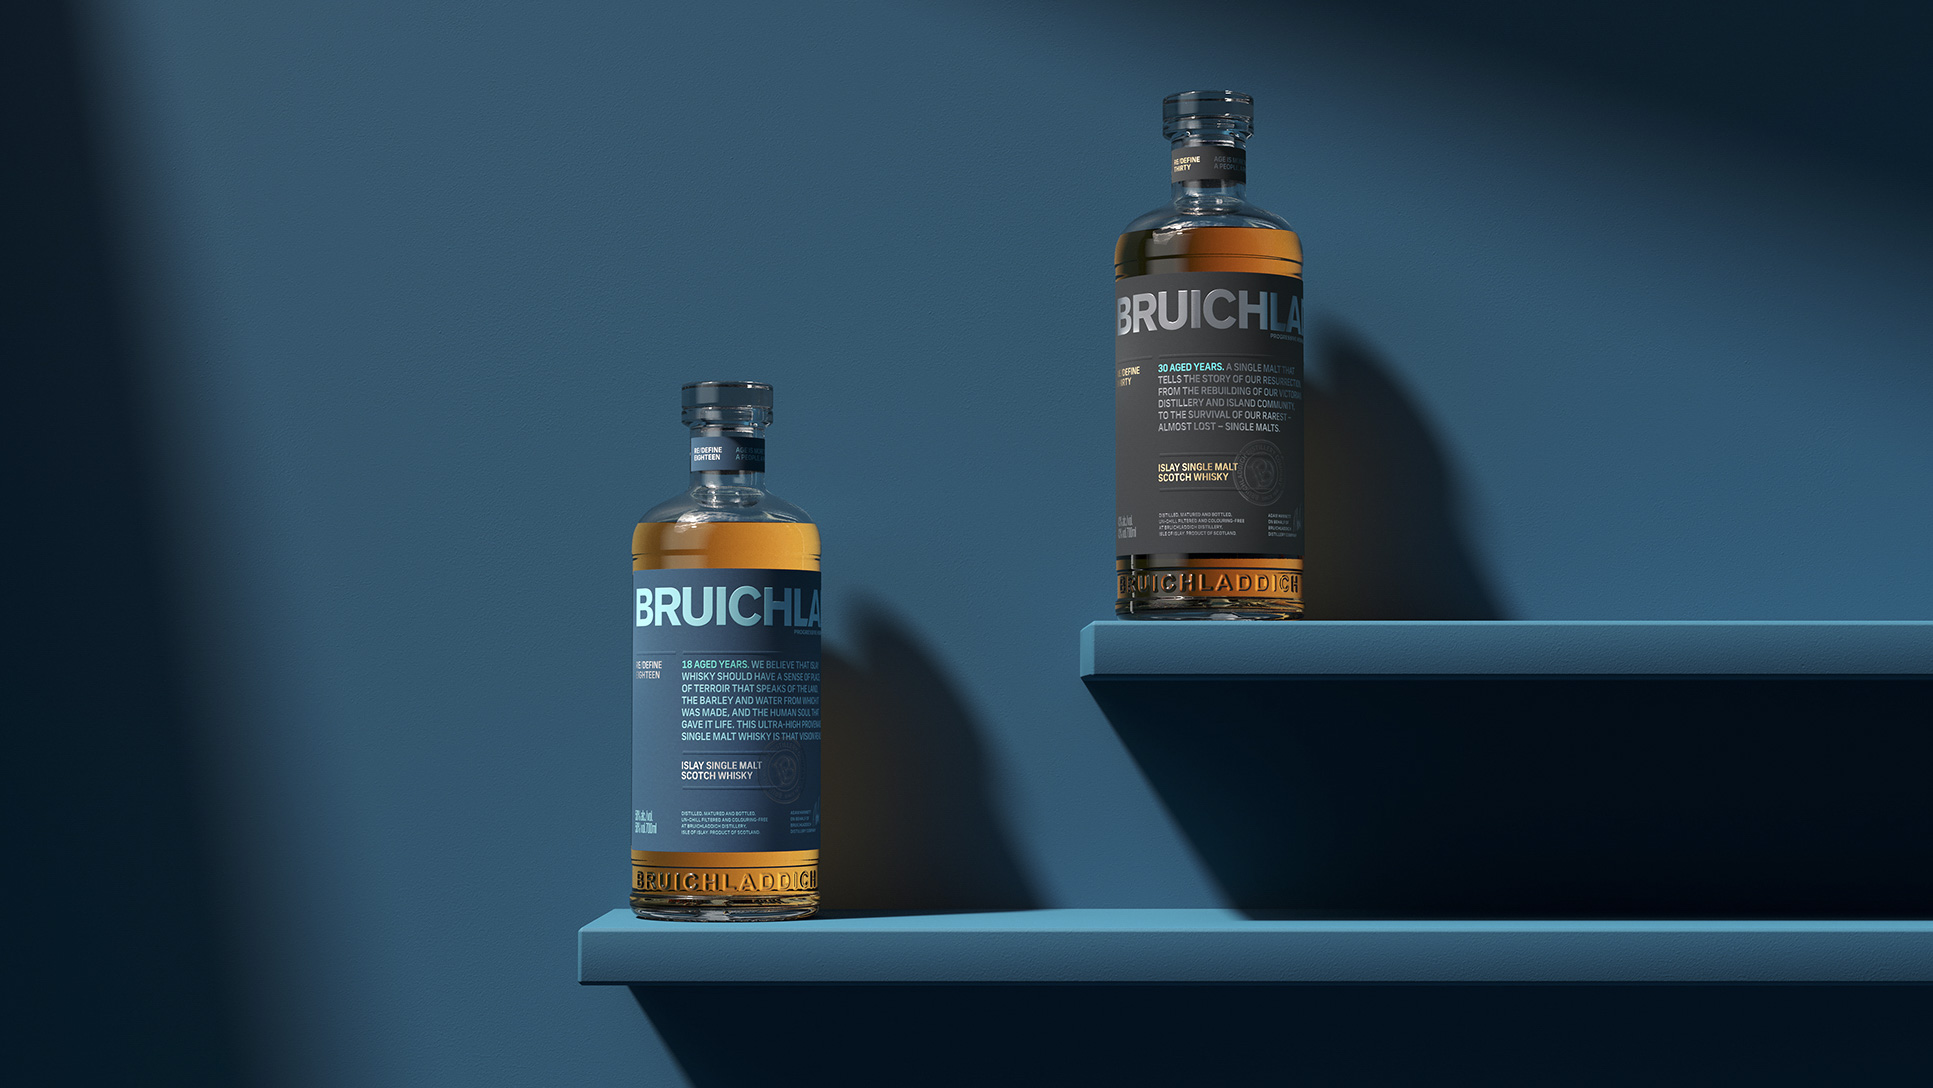 Industry First as Thirst Redefines Luxury for Bruichladdich’s New High-Provenance, Age-Statement Whiskies